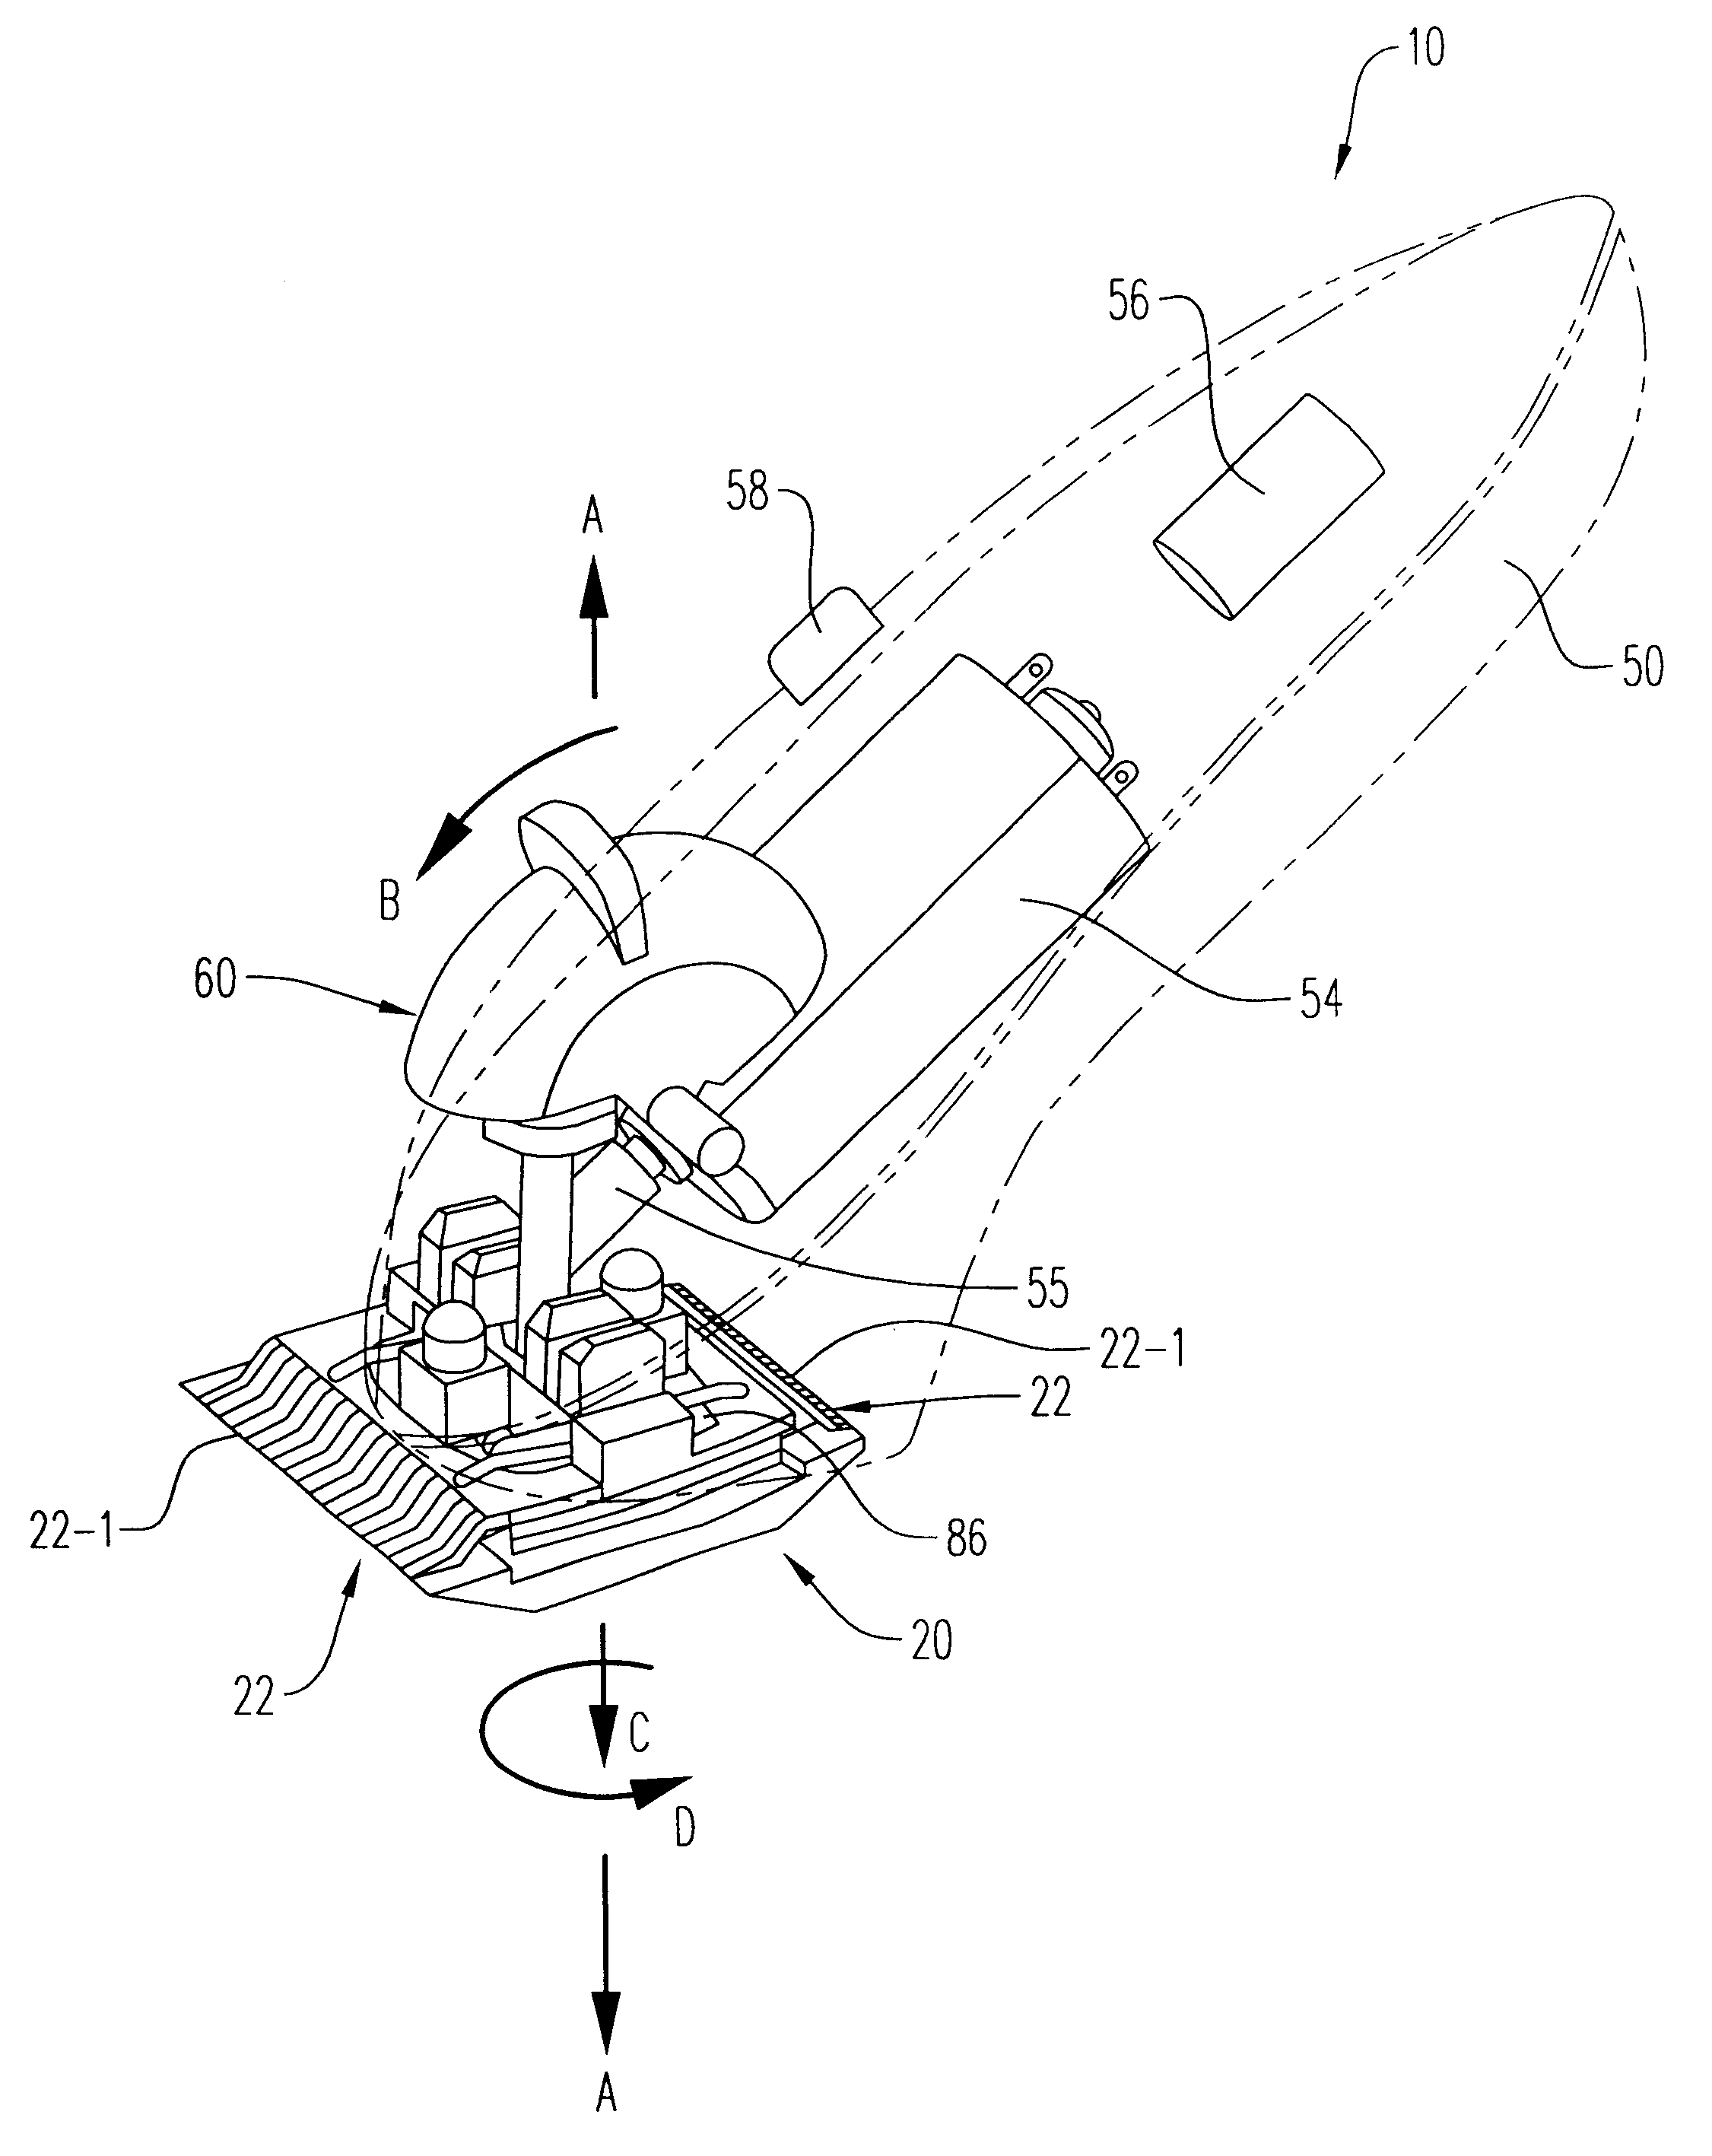 Hair clipper with rotating blade assembly